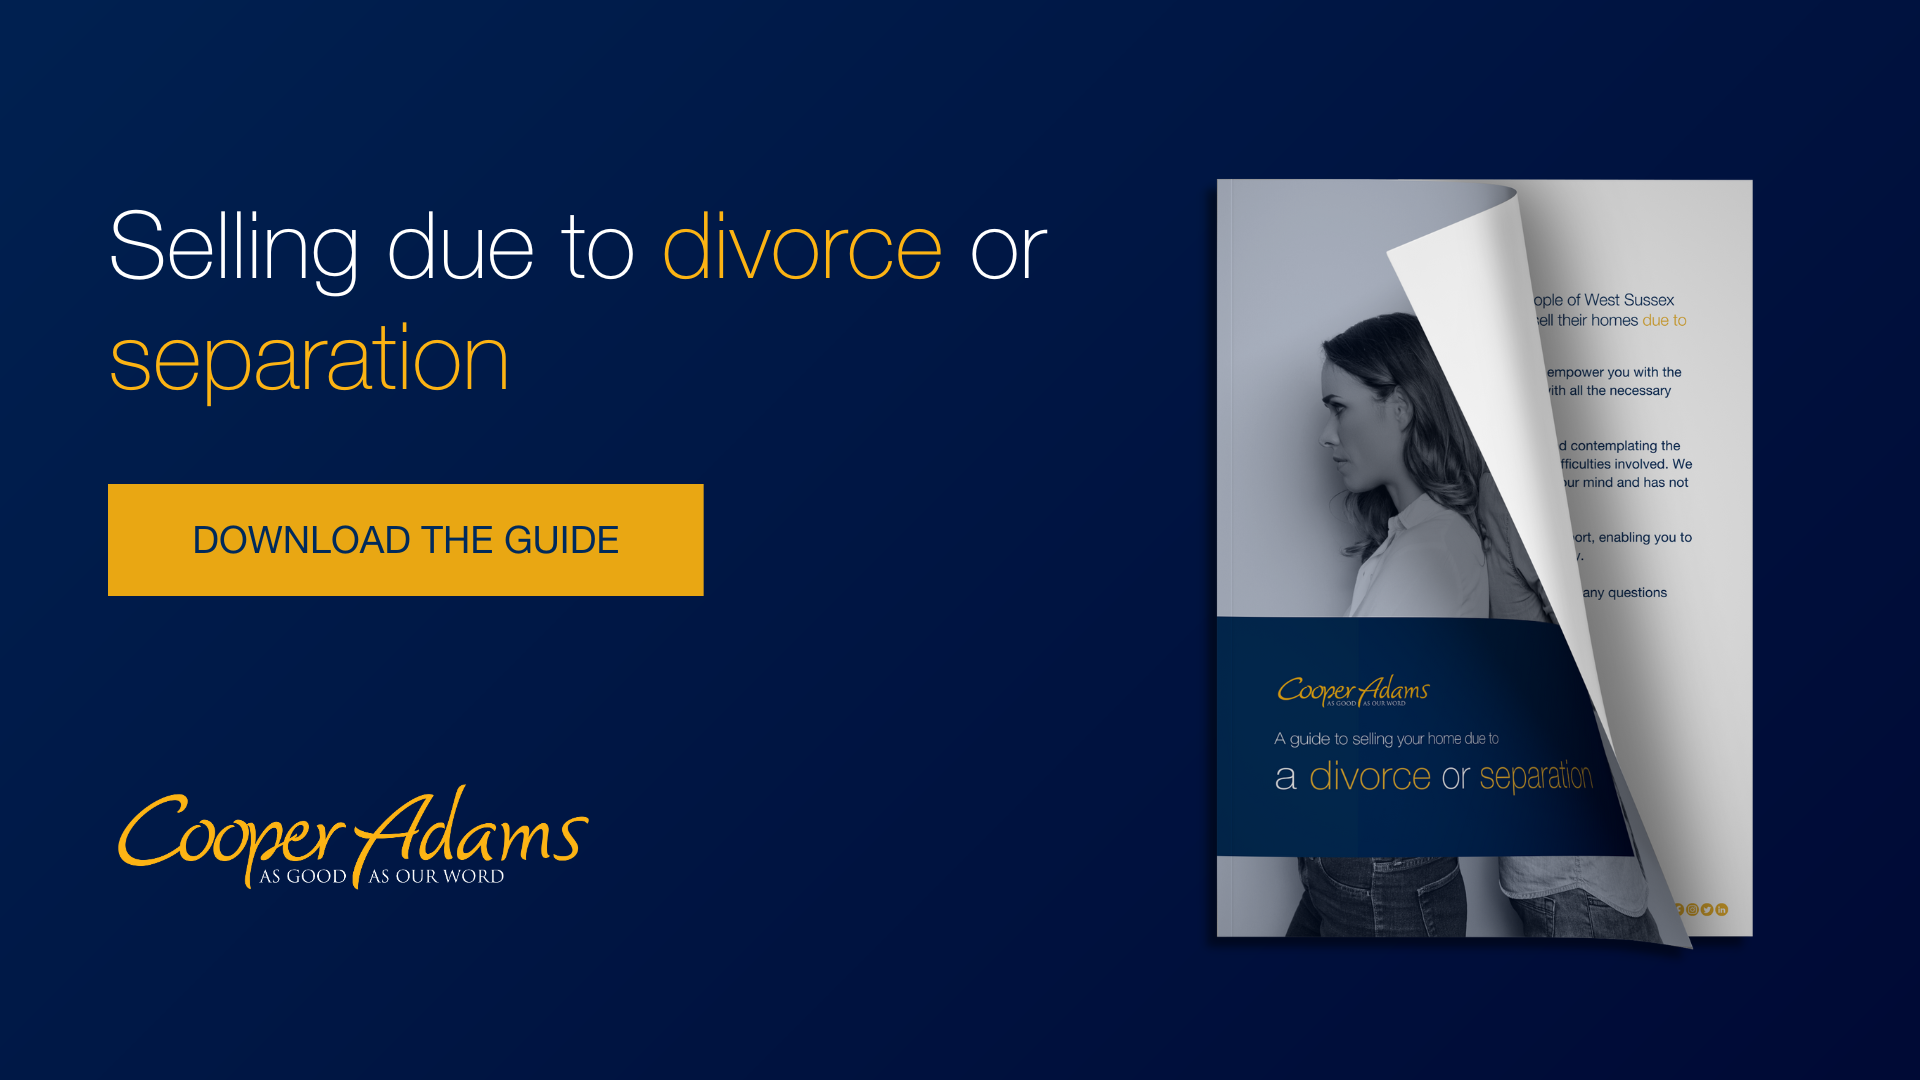 Download our guide to selling due to divorce or separation